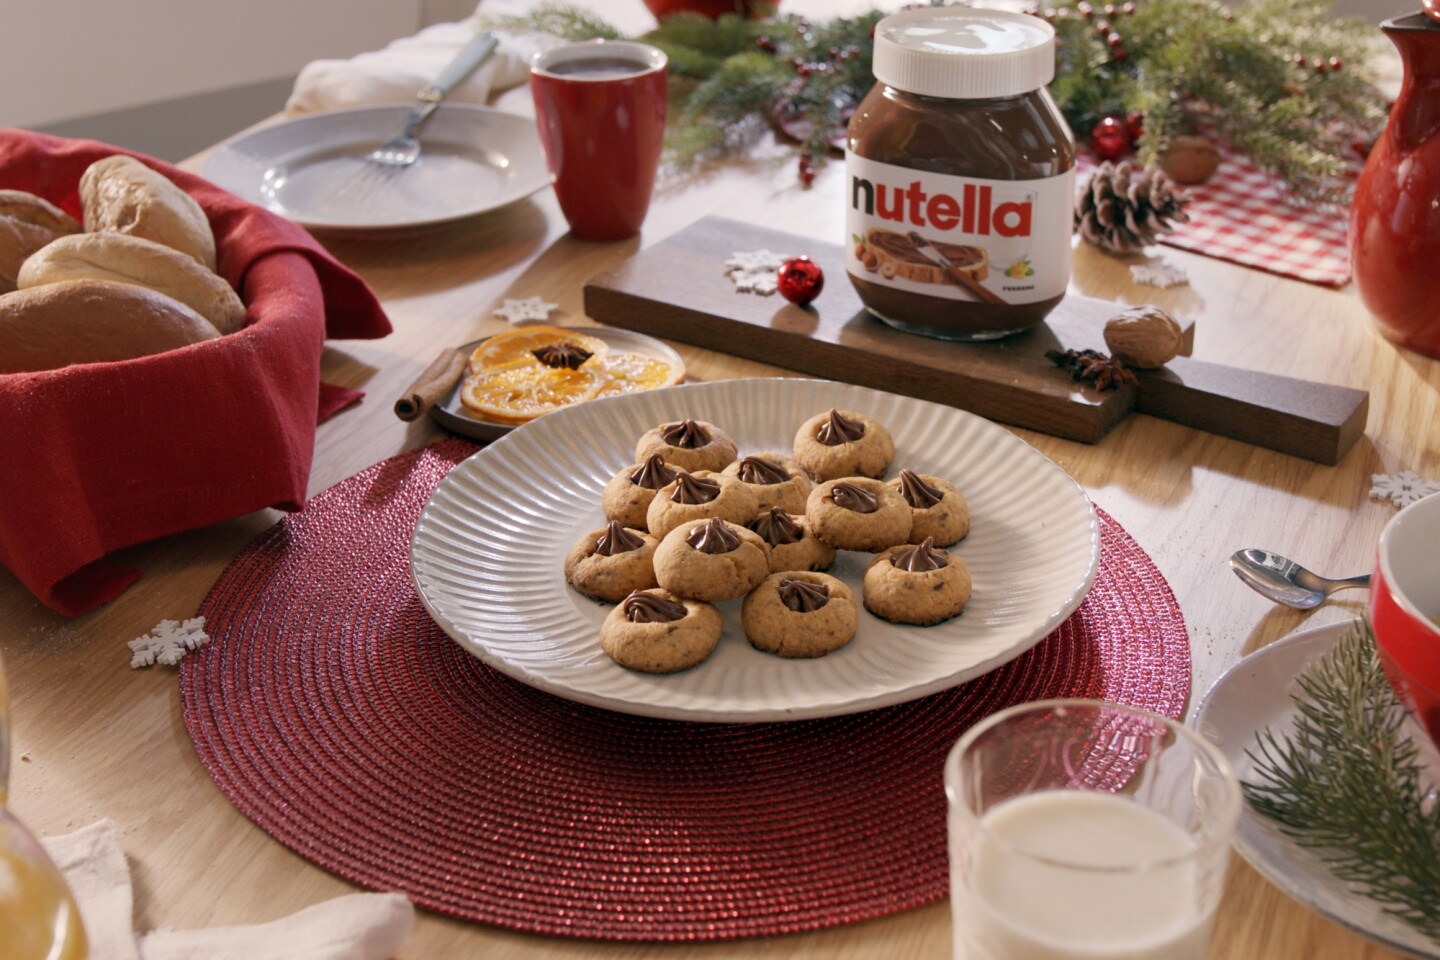 thumbprint_cookies_by_nutella_recipe_.pos detail poland